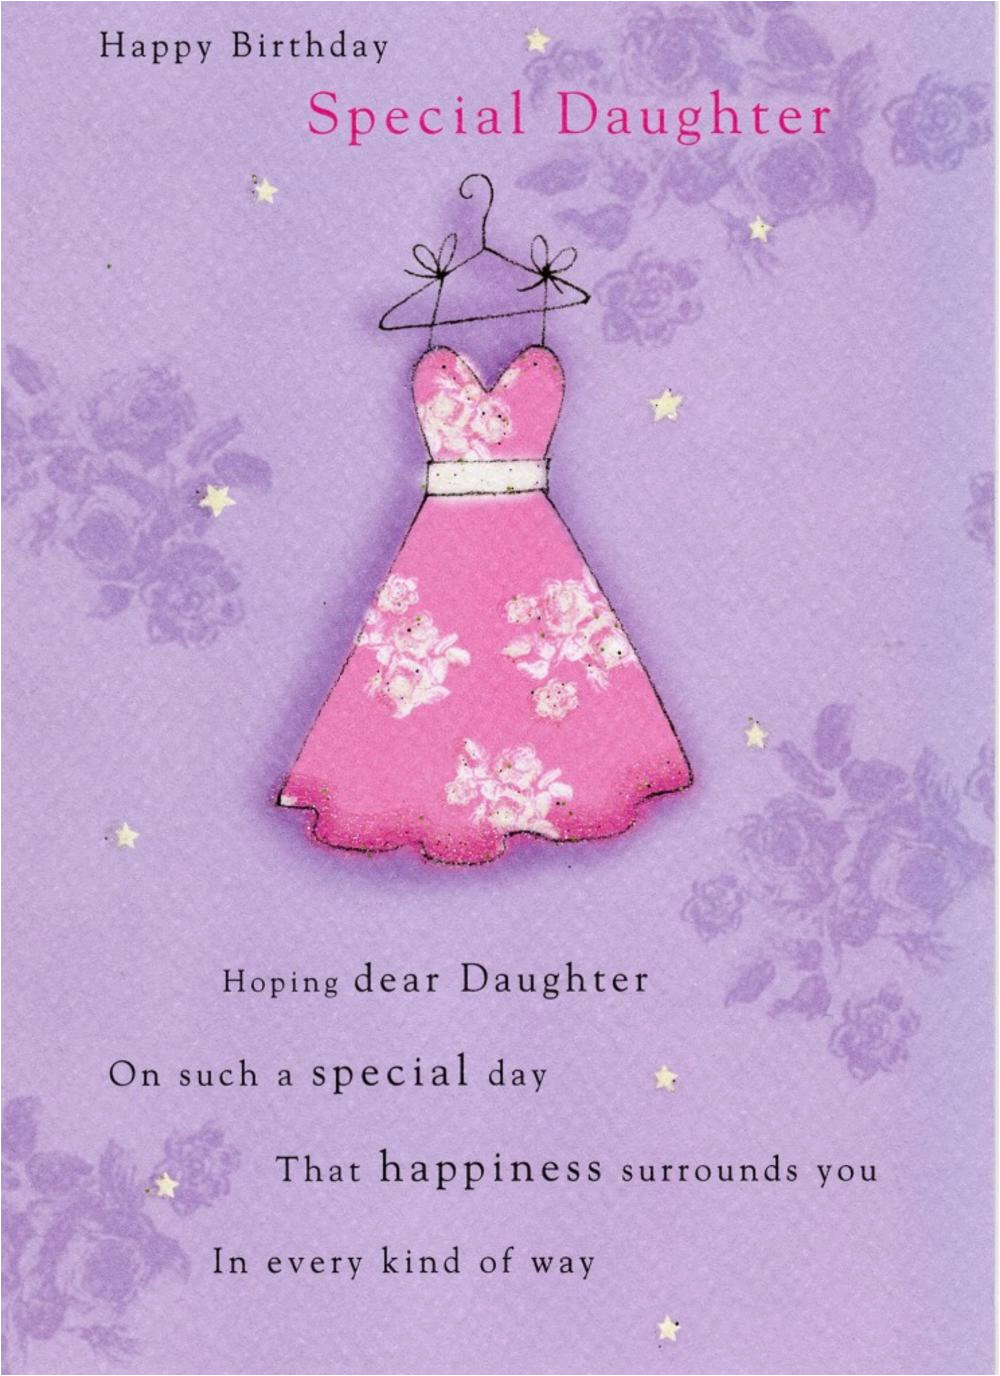 special daughter birthday greeting card cards love kates